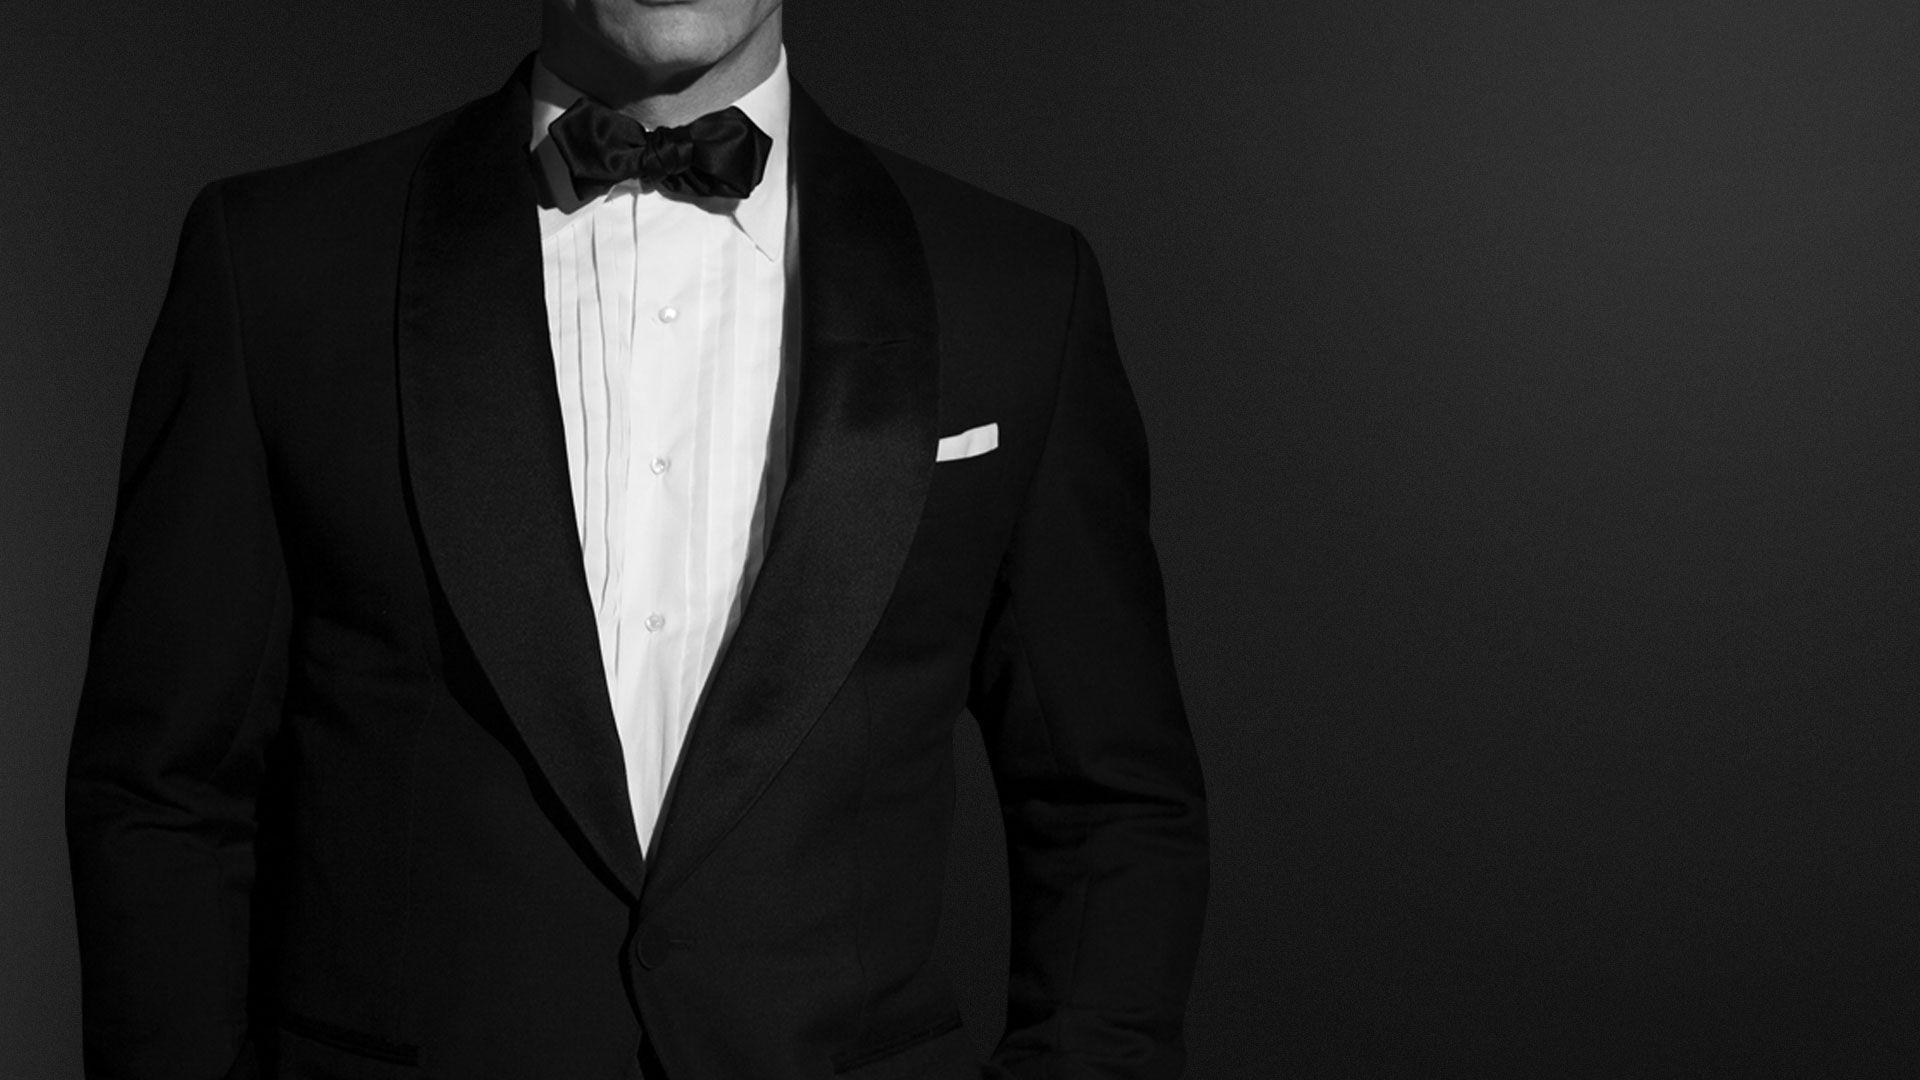 Tuxedo Gallery of Wallpaper. Free Download For Android, Desktop